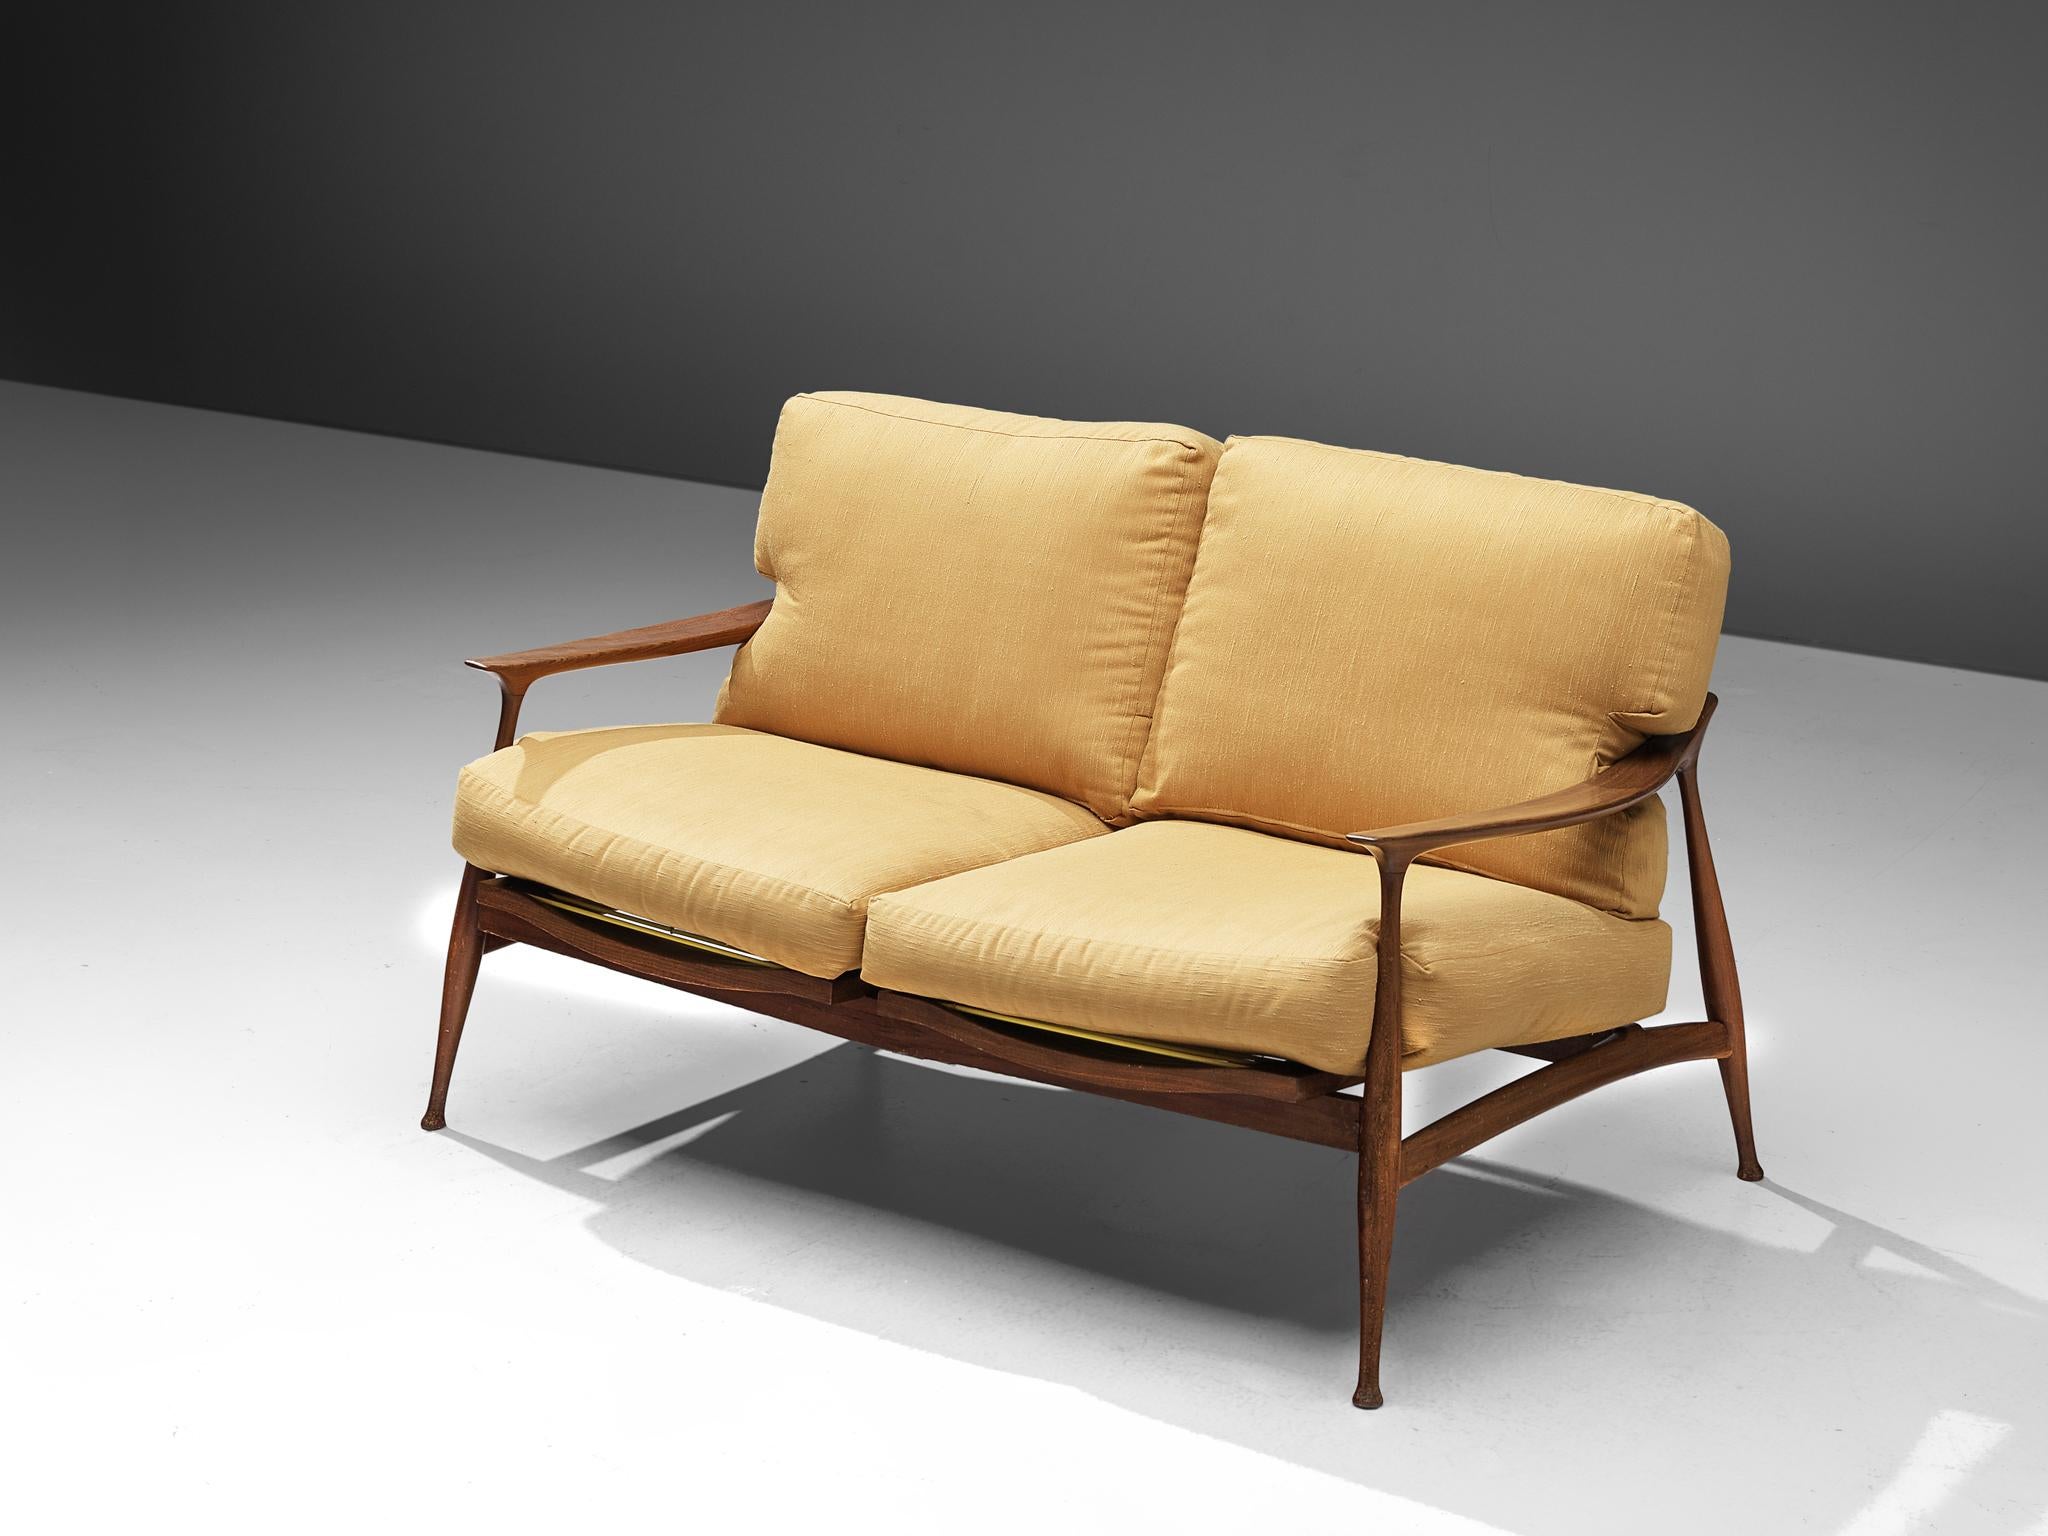 Fratelli Reguitti, sofa model 'Lord', walnut, yellow fabric upholstery, Italy, 1959

Beautiful settee in solid walnut by Fratelli Reguitti. This sofa has a beautiful detailed and organic shaped design. The high cylindrical legs are tapered to the